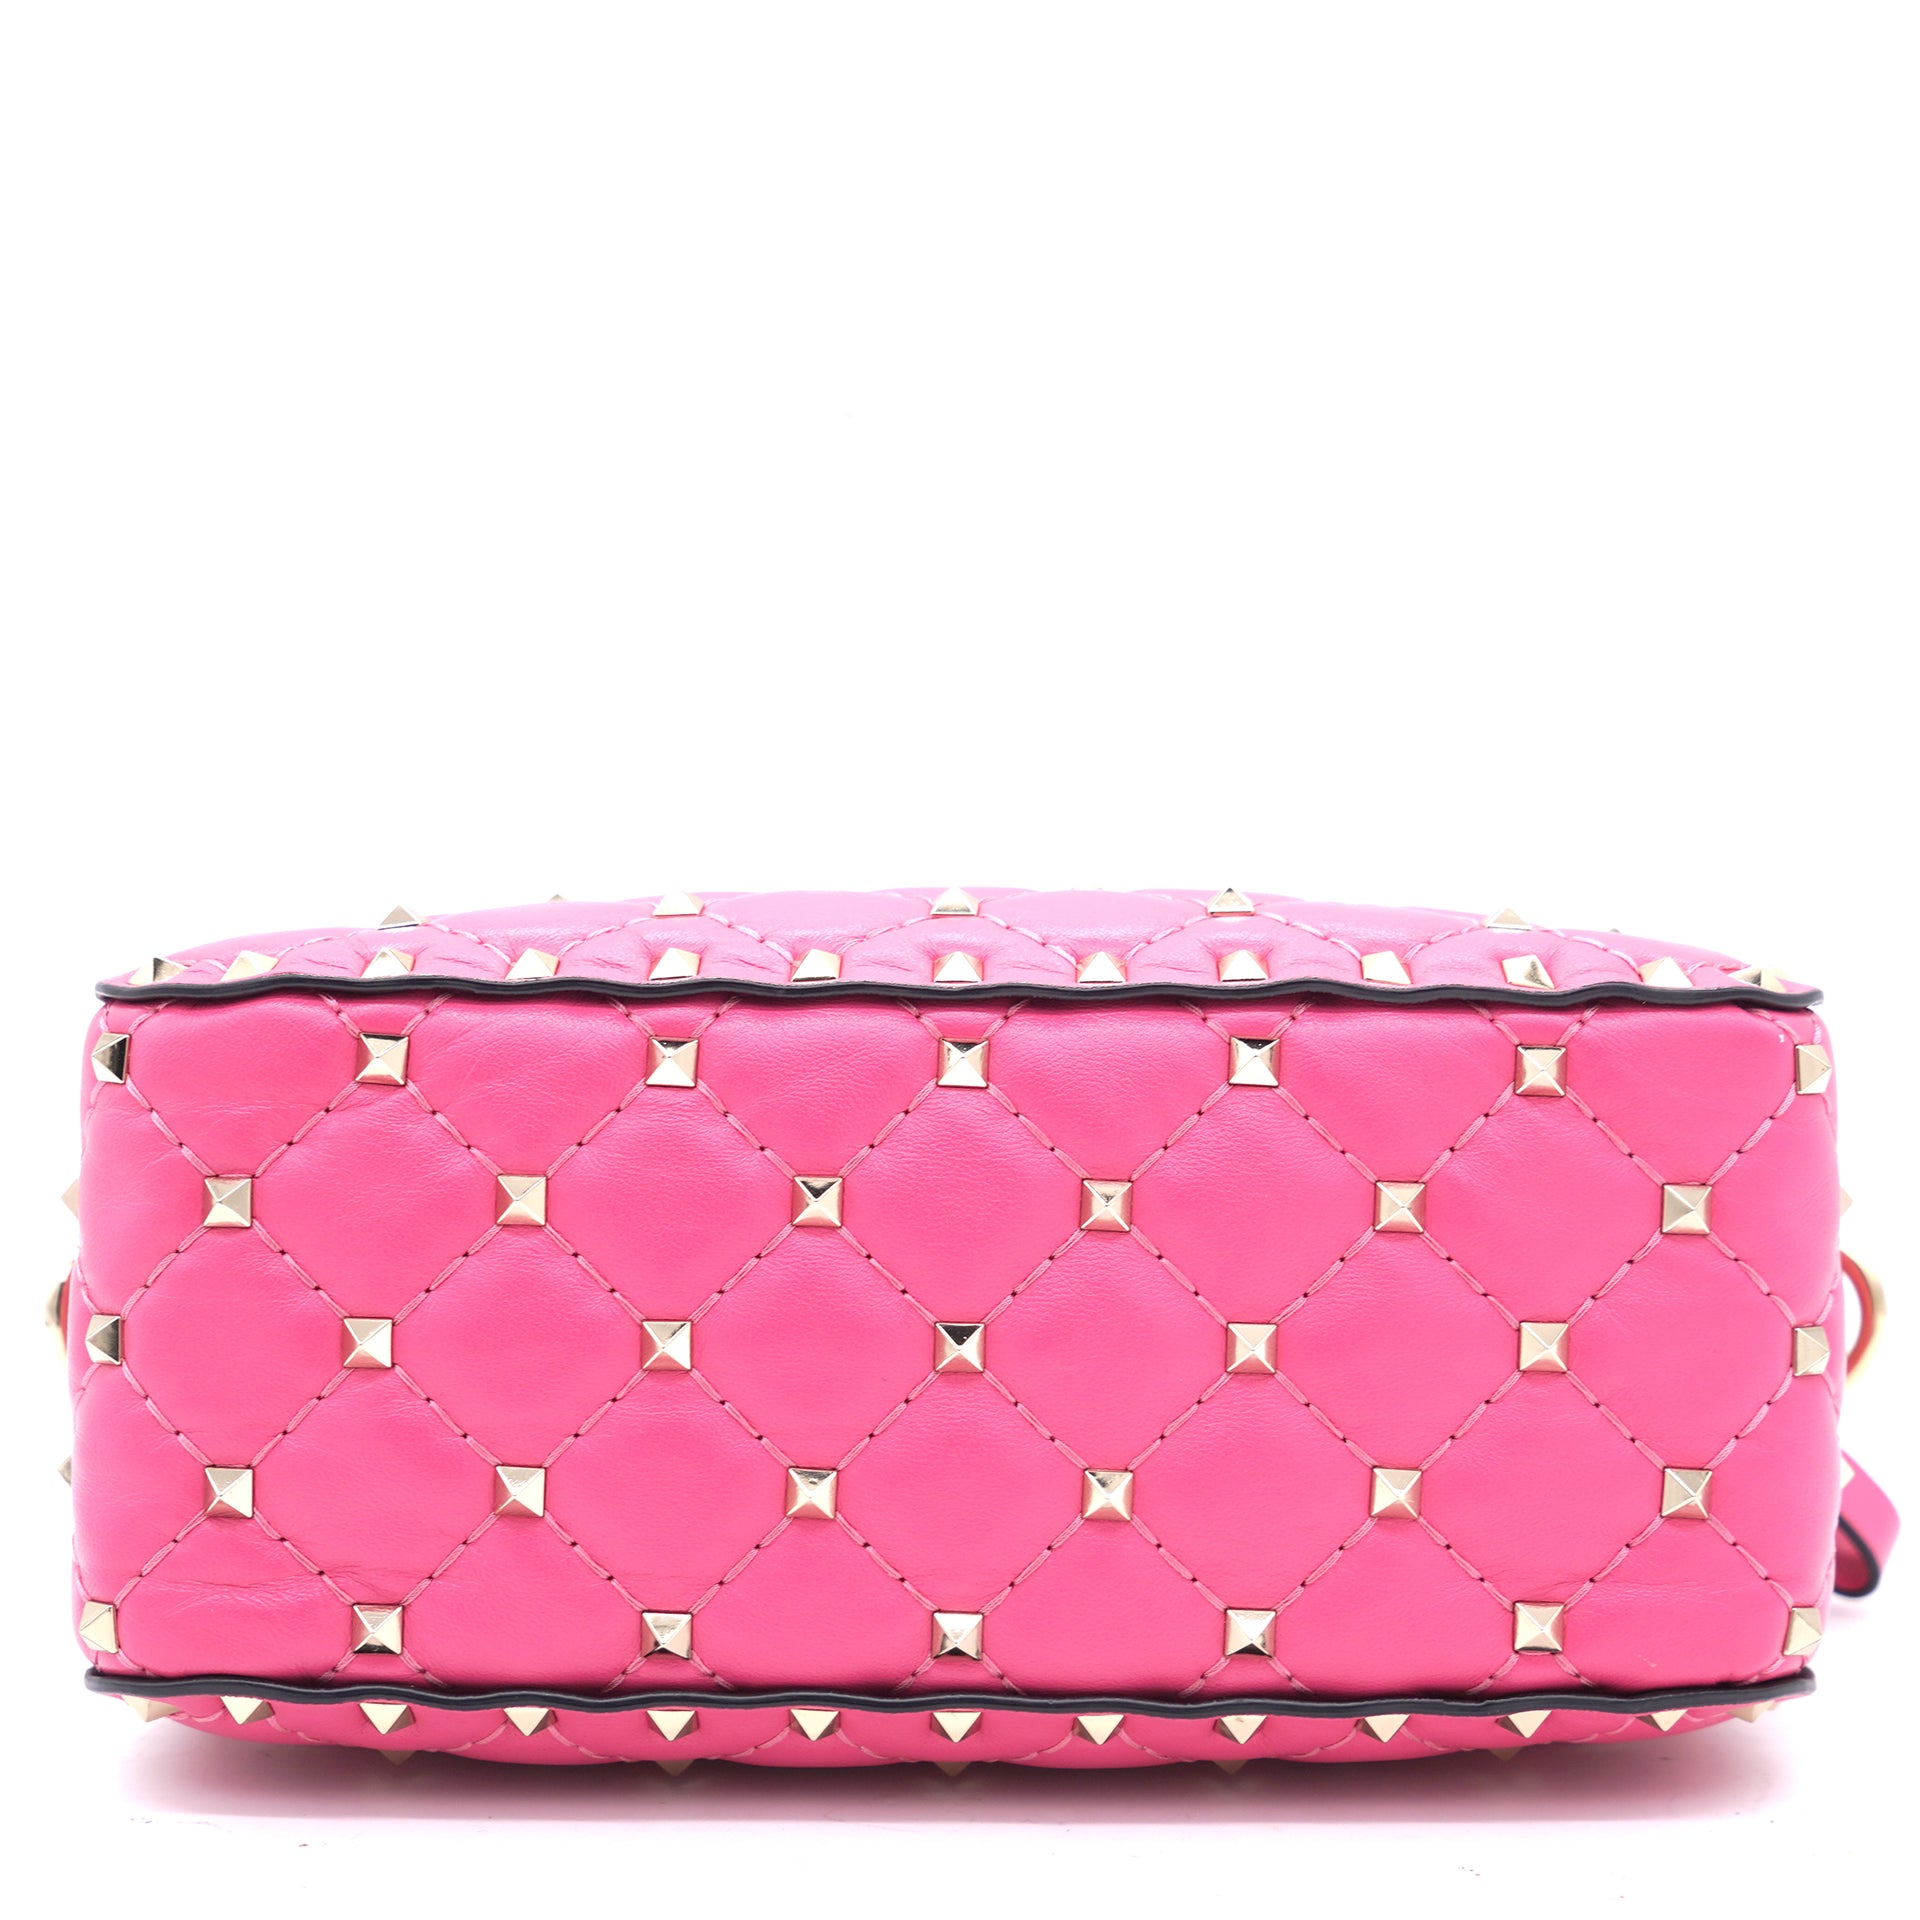 Pink Quilted Leather Rockstud Spike Camera Case Crossbody Bag